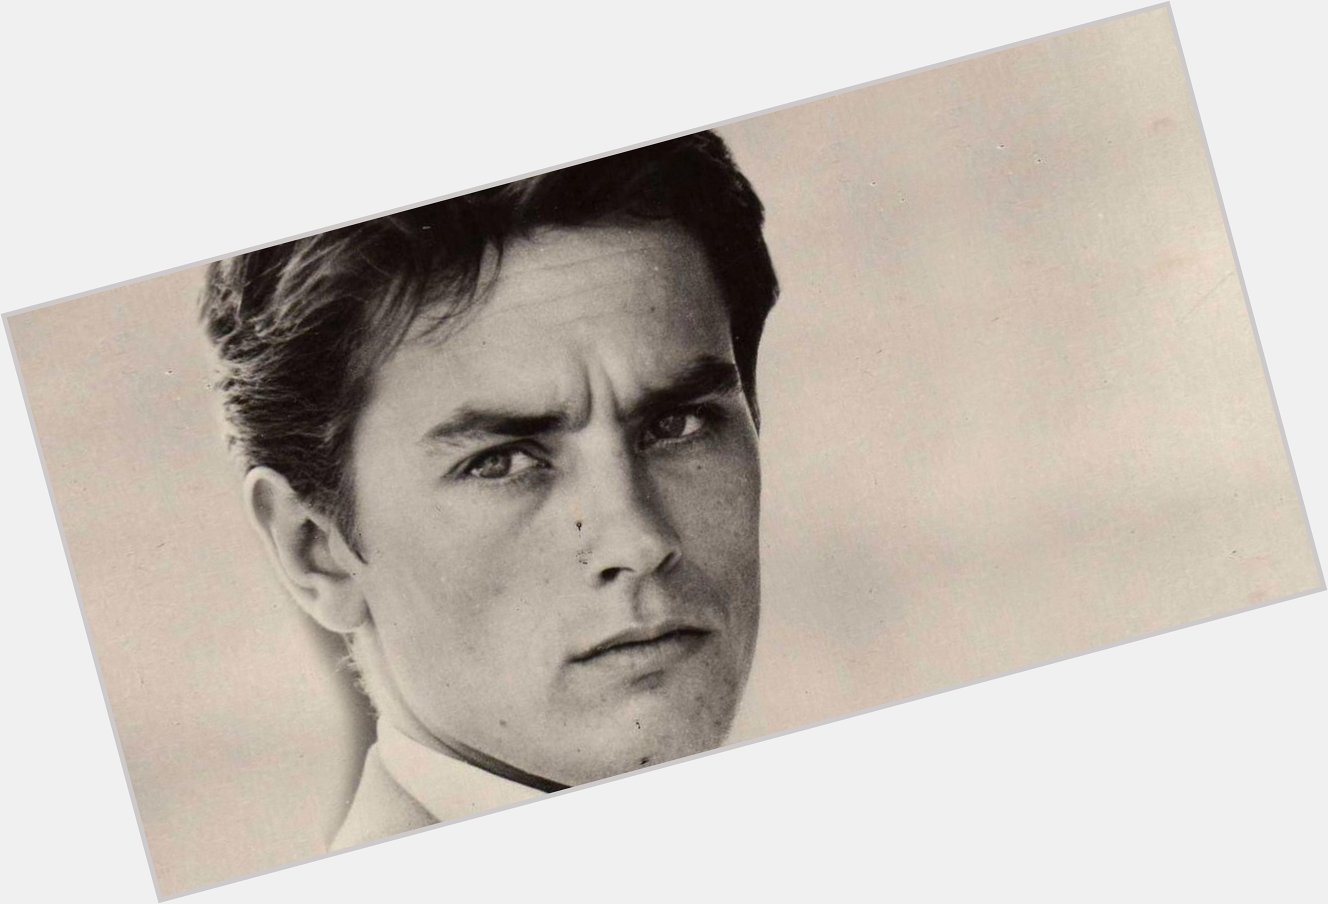 Happy Birthday Alain Delon! Most handsome actor, alpha and FN -Le Pen supporter of the French people! 